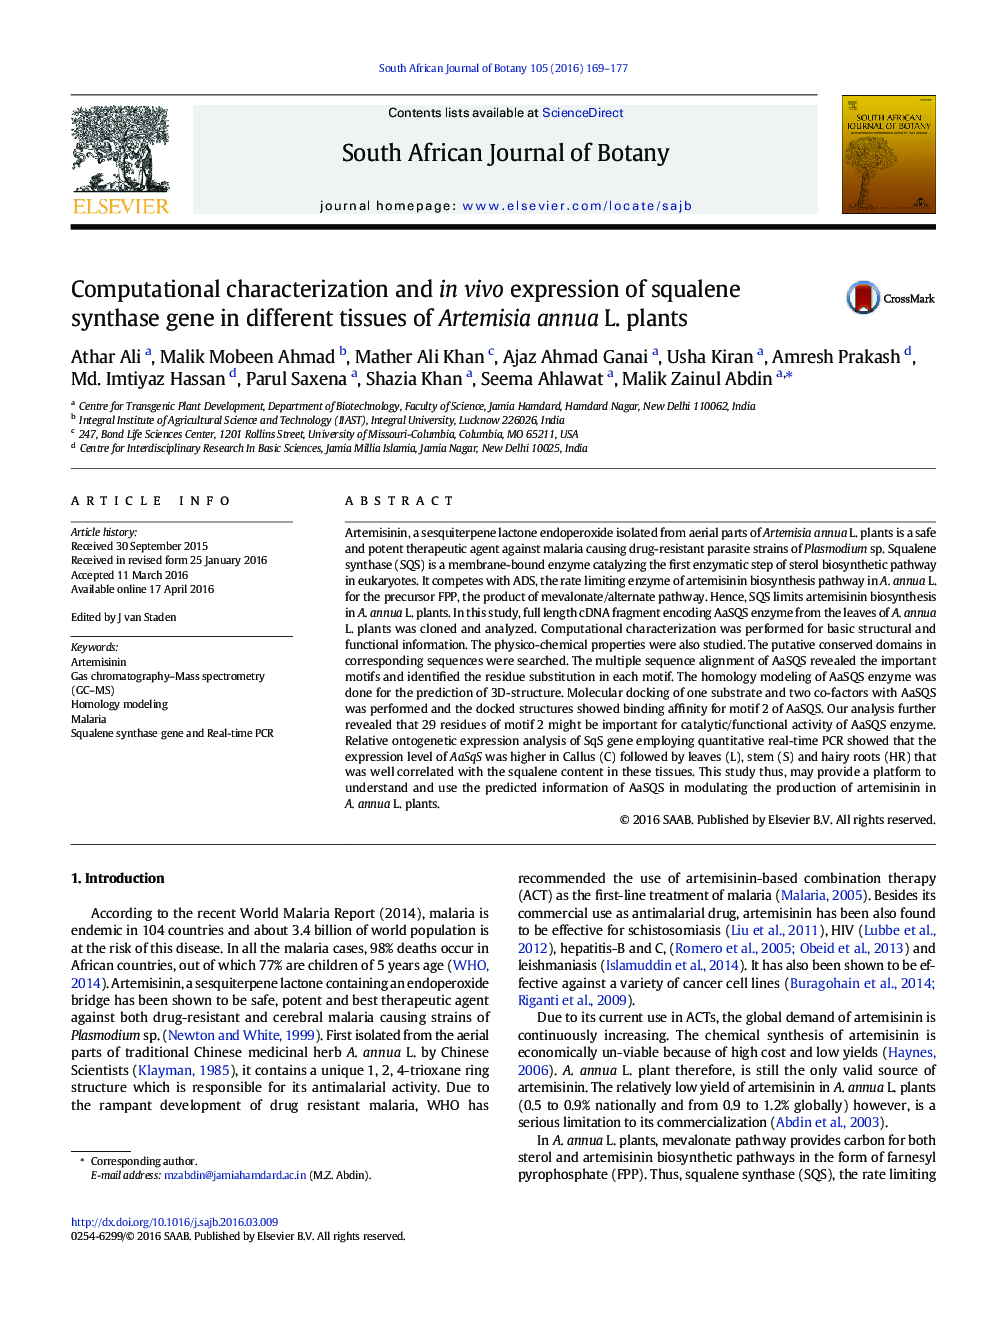 Computational characterization and in vivo expression of squalene synthase gene in different tissues of Artemisia annua L. plants